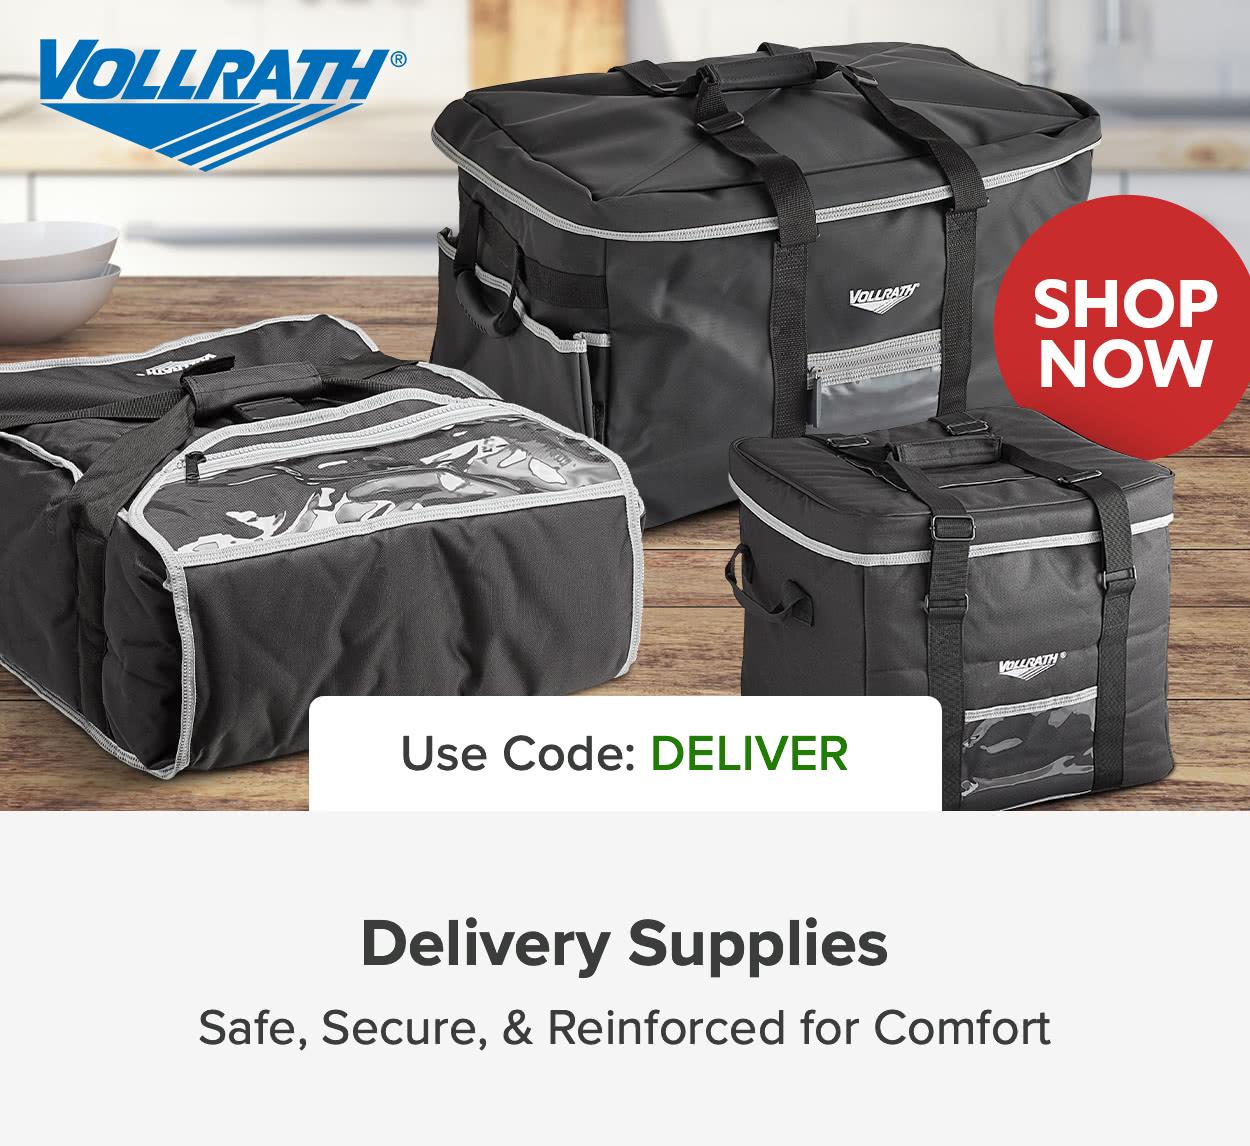 Delivery Supples That Are Safe, Secure, and Reinforced for Comfort